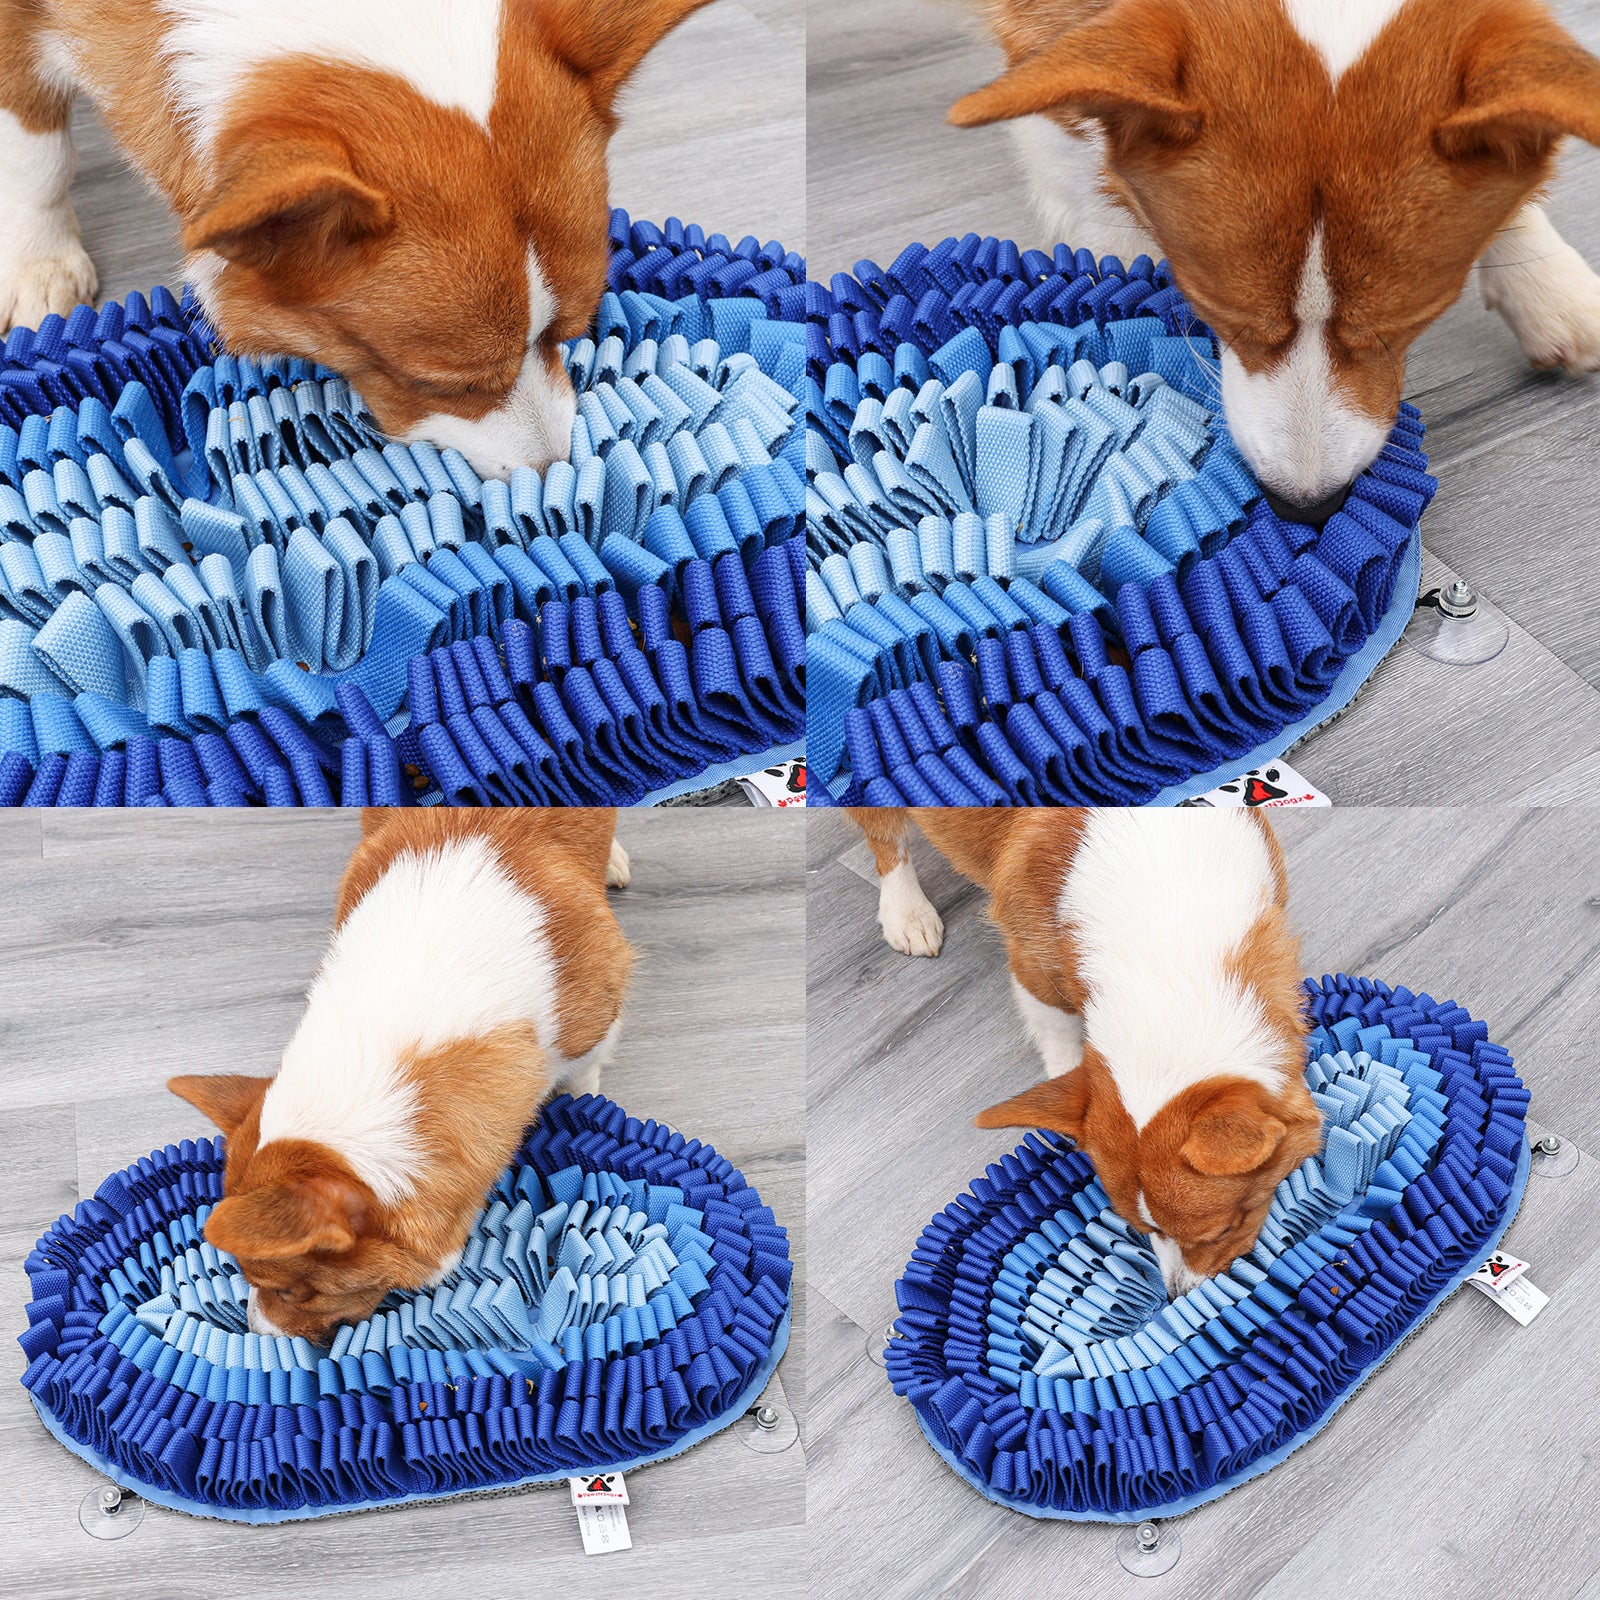 Large Snuffle Mat for Dogs, 32 x 24 inch Dogs Nosework Feeding Mat